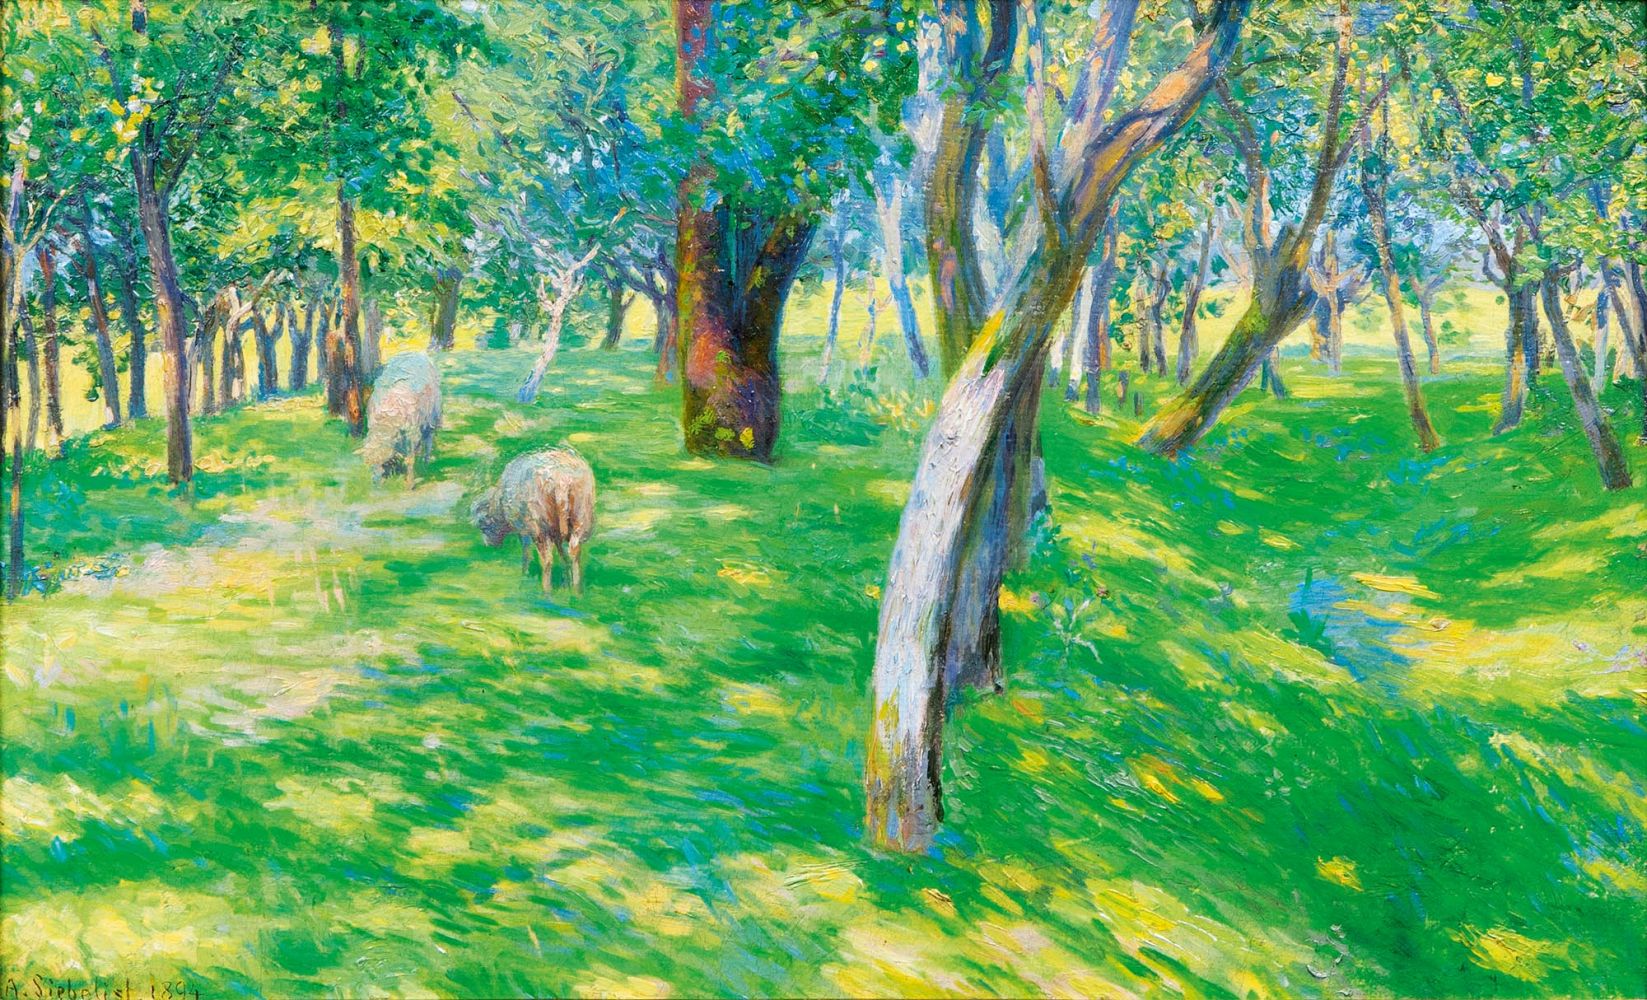 Sheep in a sunlit Wood